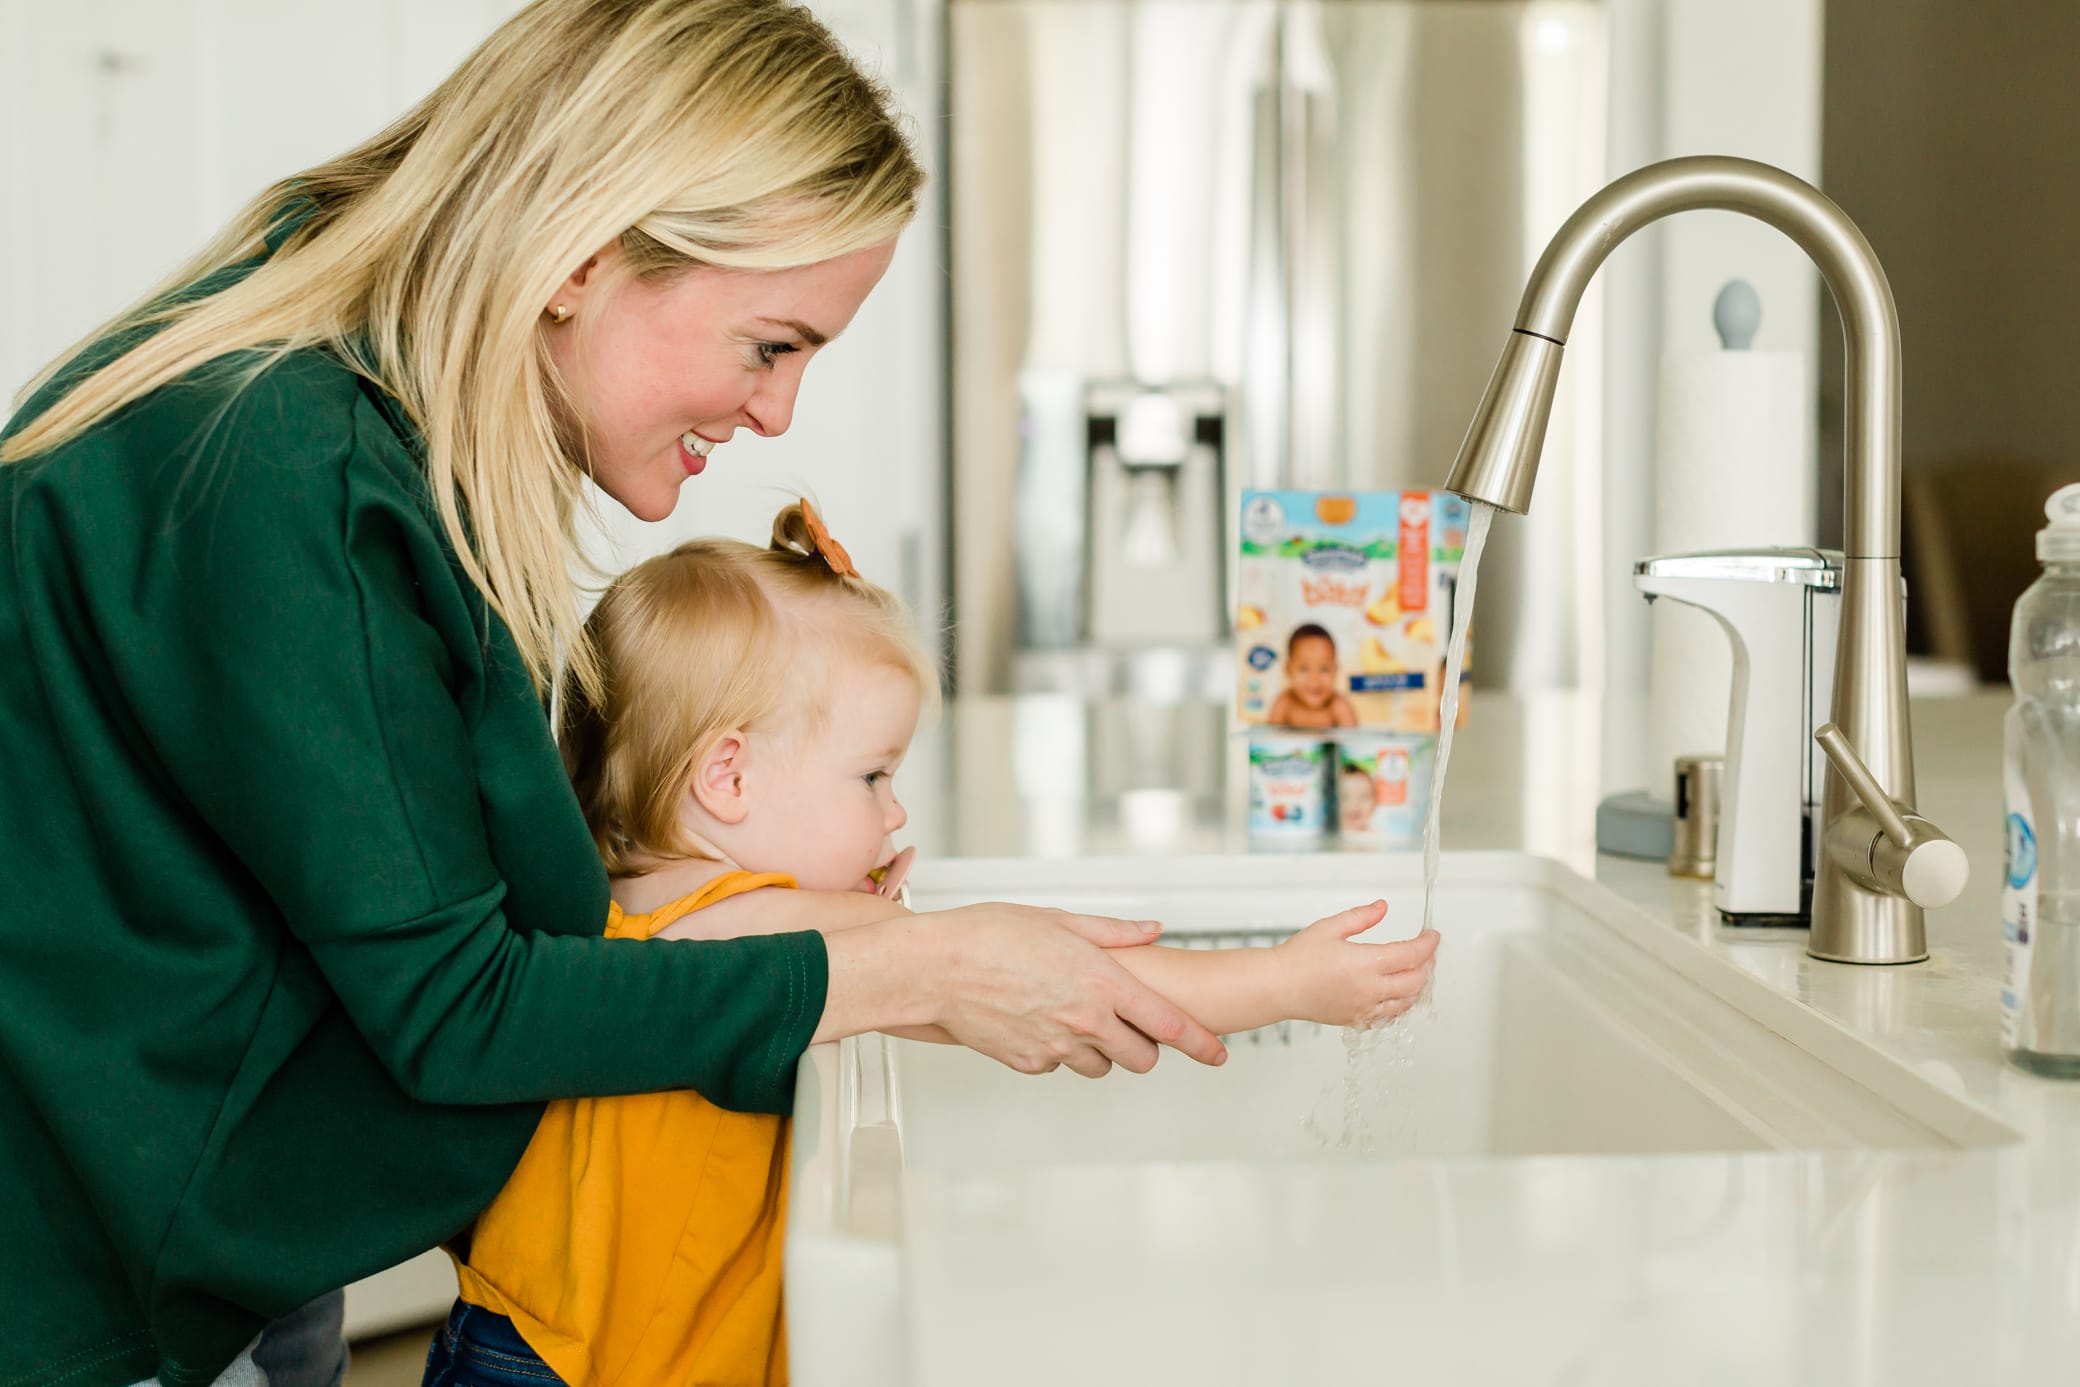 Moms standing behind her young daughter as she helps her wash her hands at the kitchen sink.